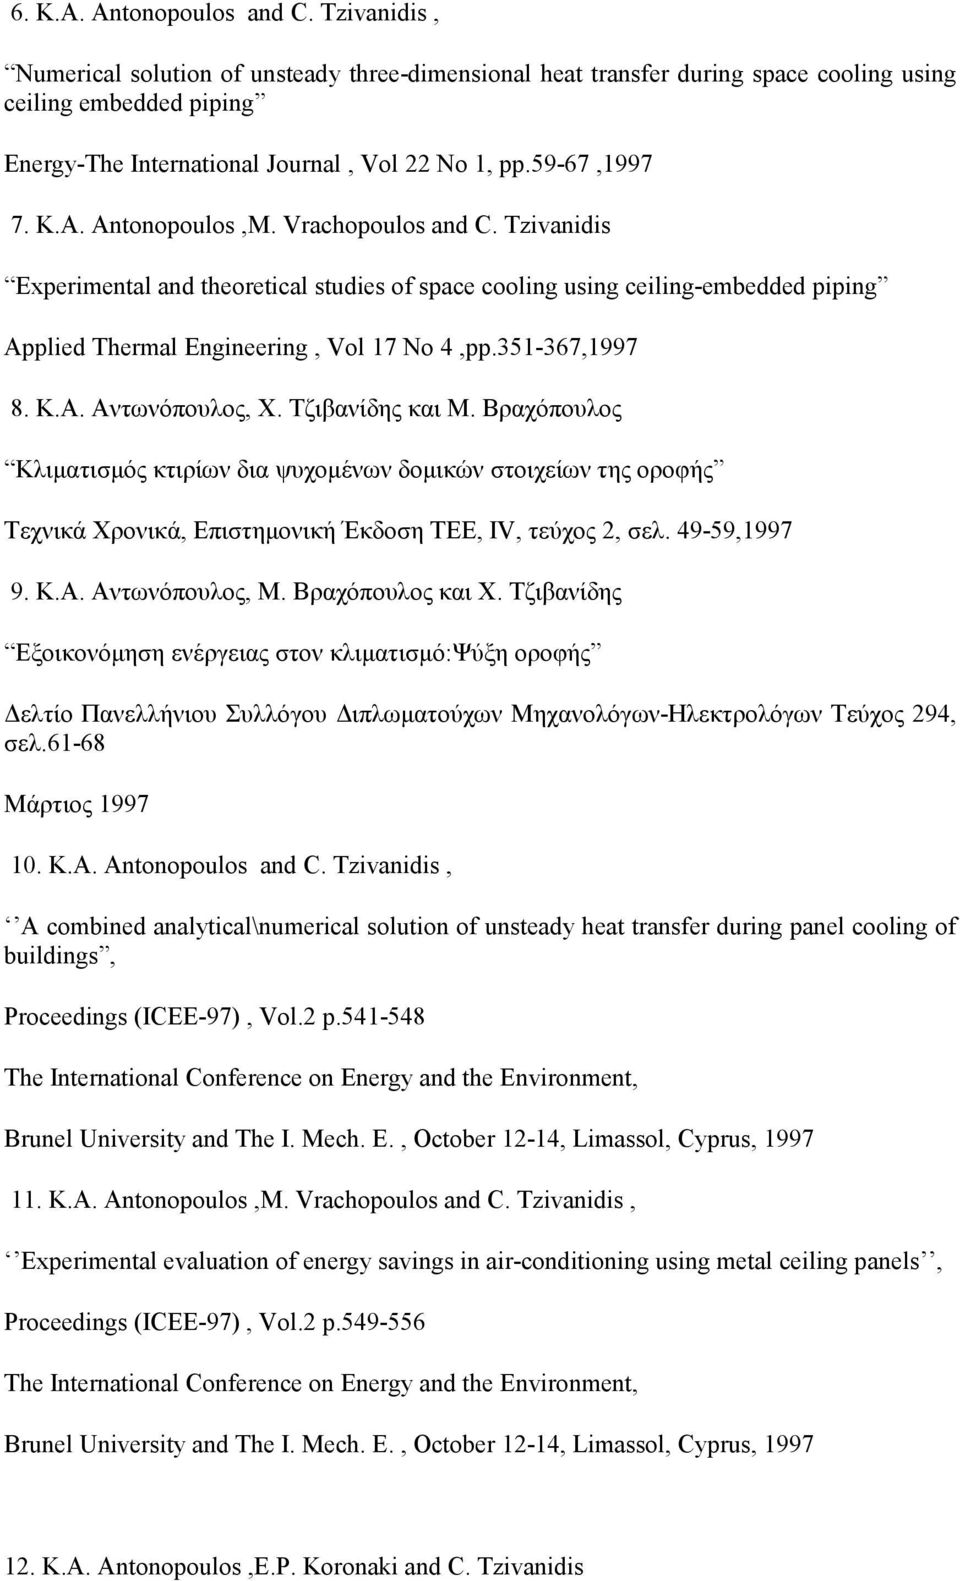 Antonopoulos,M. Vrachopoulos and C. Tzivanidis Experimental and theoretical studies of space cooling using ceiling-embedded piping Applied Thermal Engineering, Vol 17 No 4,pp.351-367,1997 8. K.A. Αντωνόπουλος, Χ.